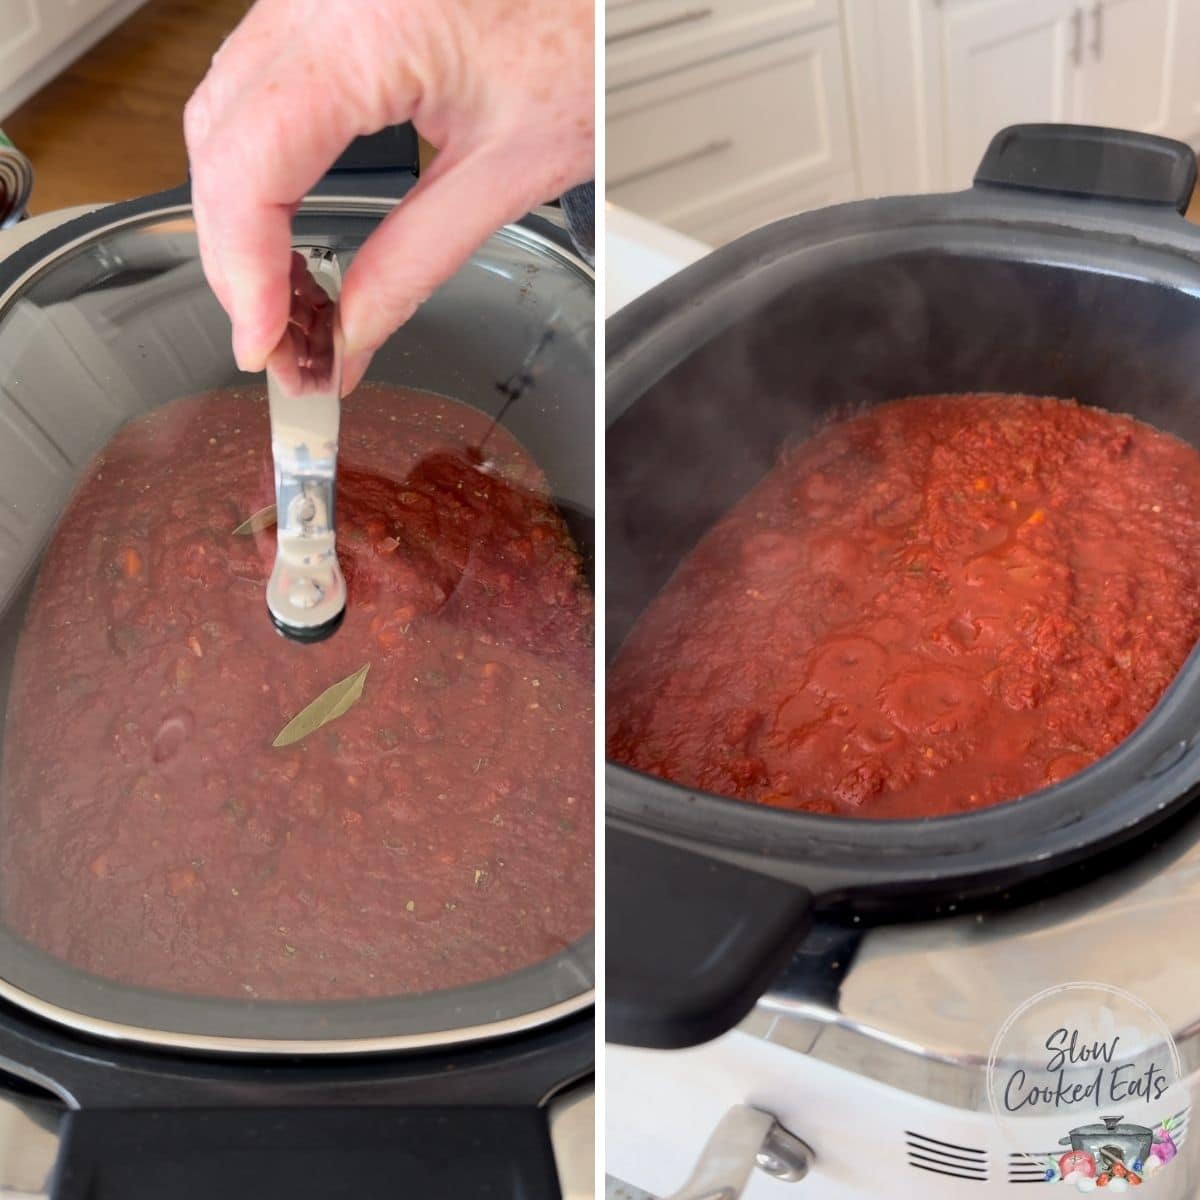 Placing a lid on the slow cooker to cook the crockpot marinara sauce.